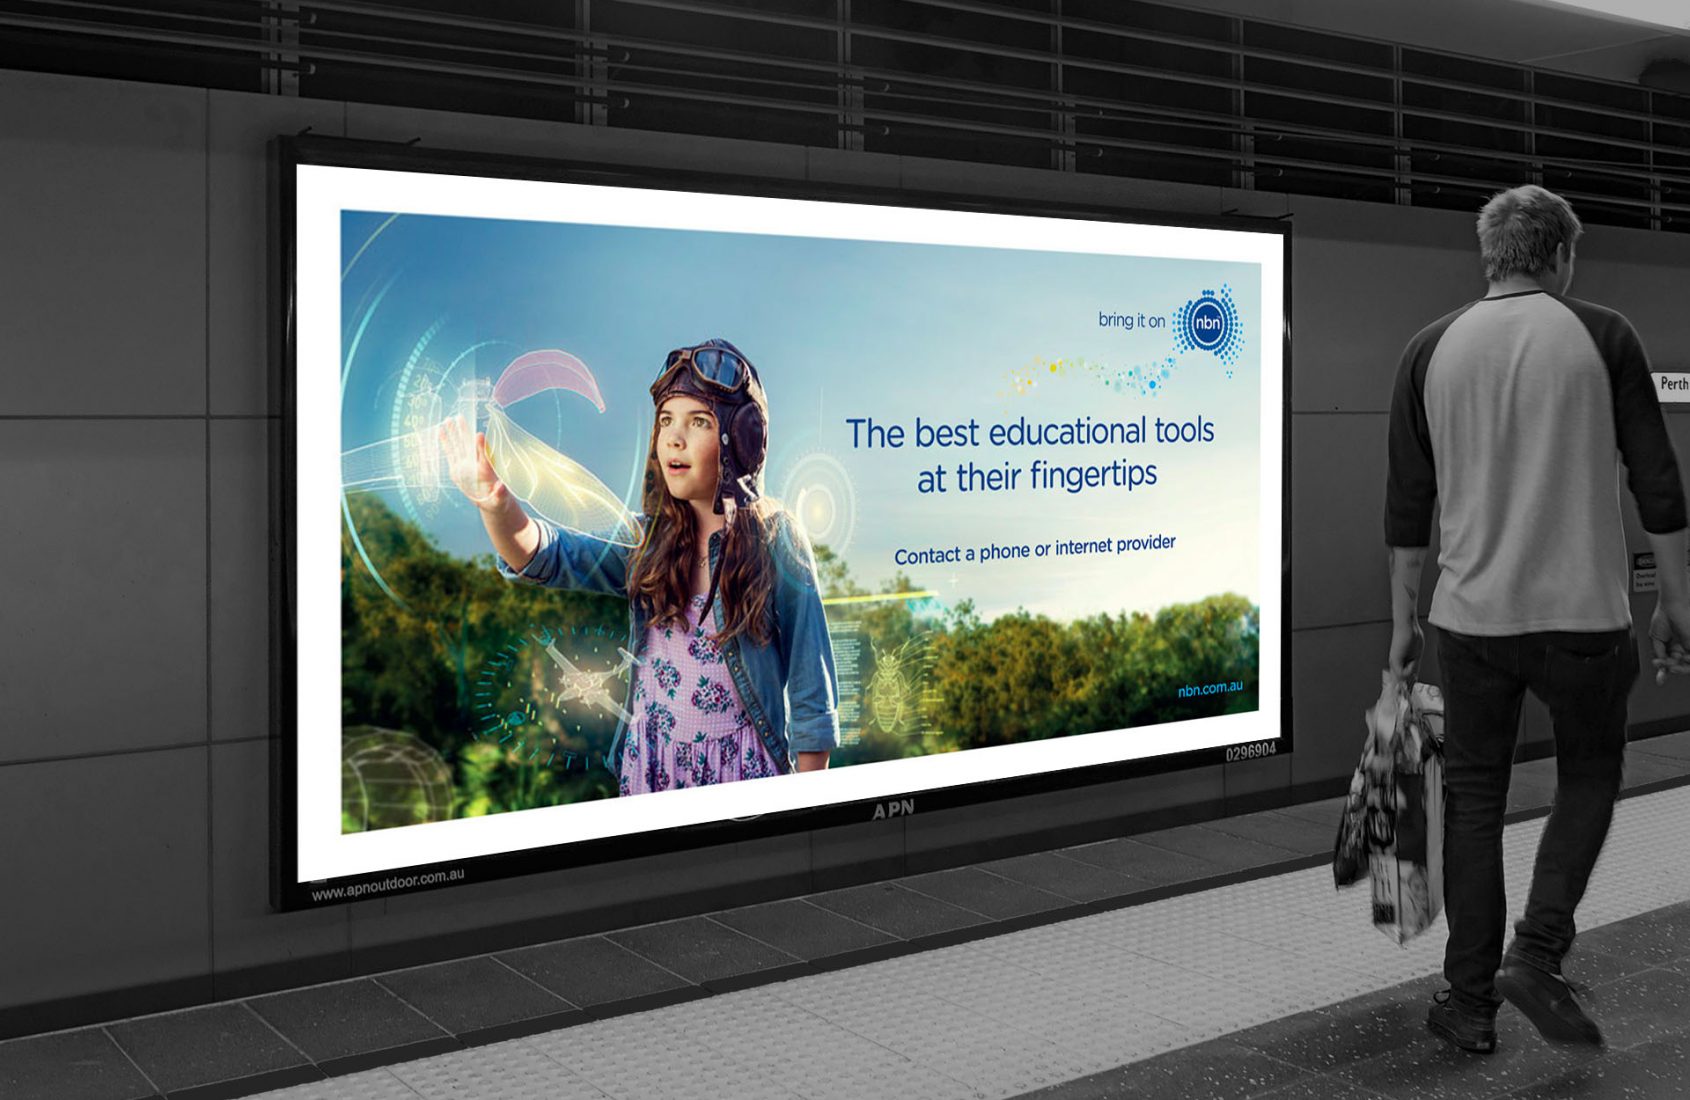 NBN bring it on relaunch Campaign - OOH educate tools